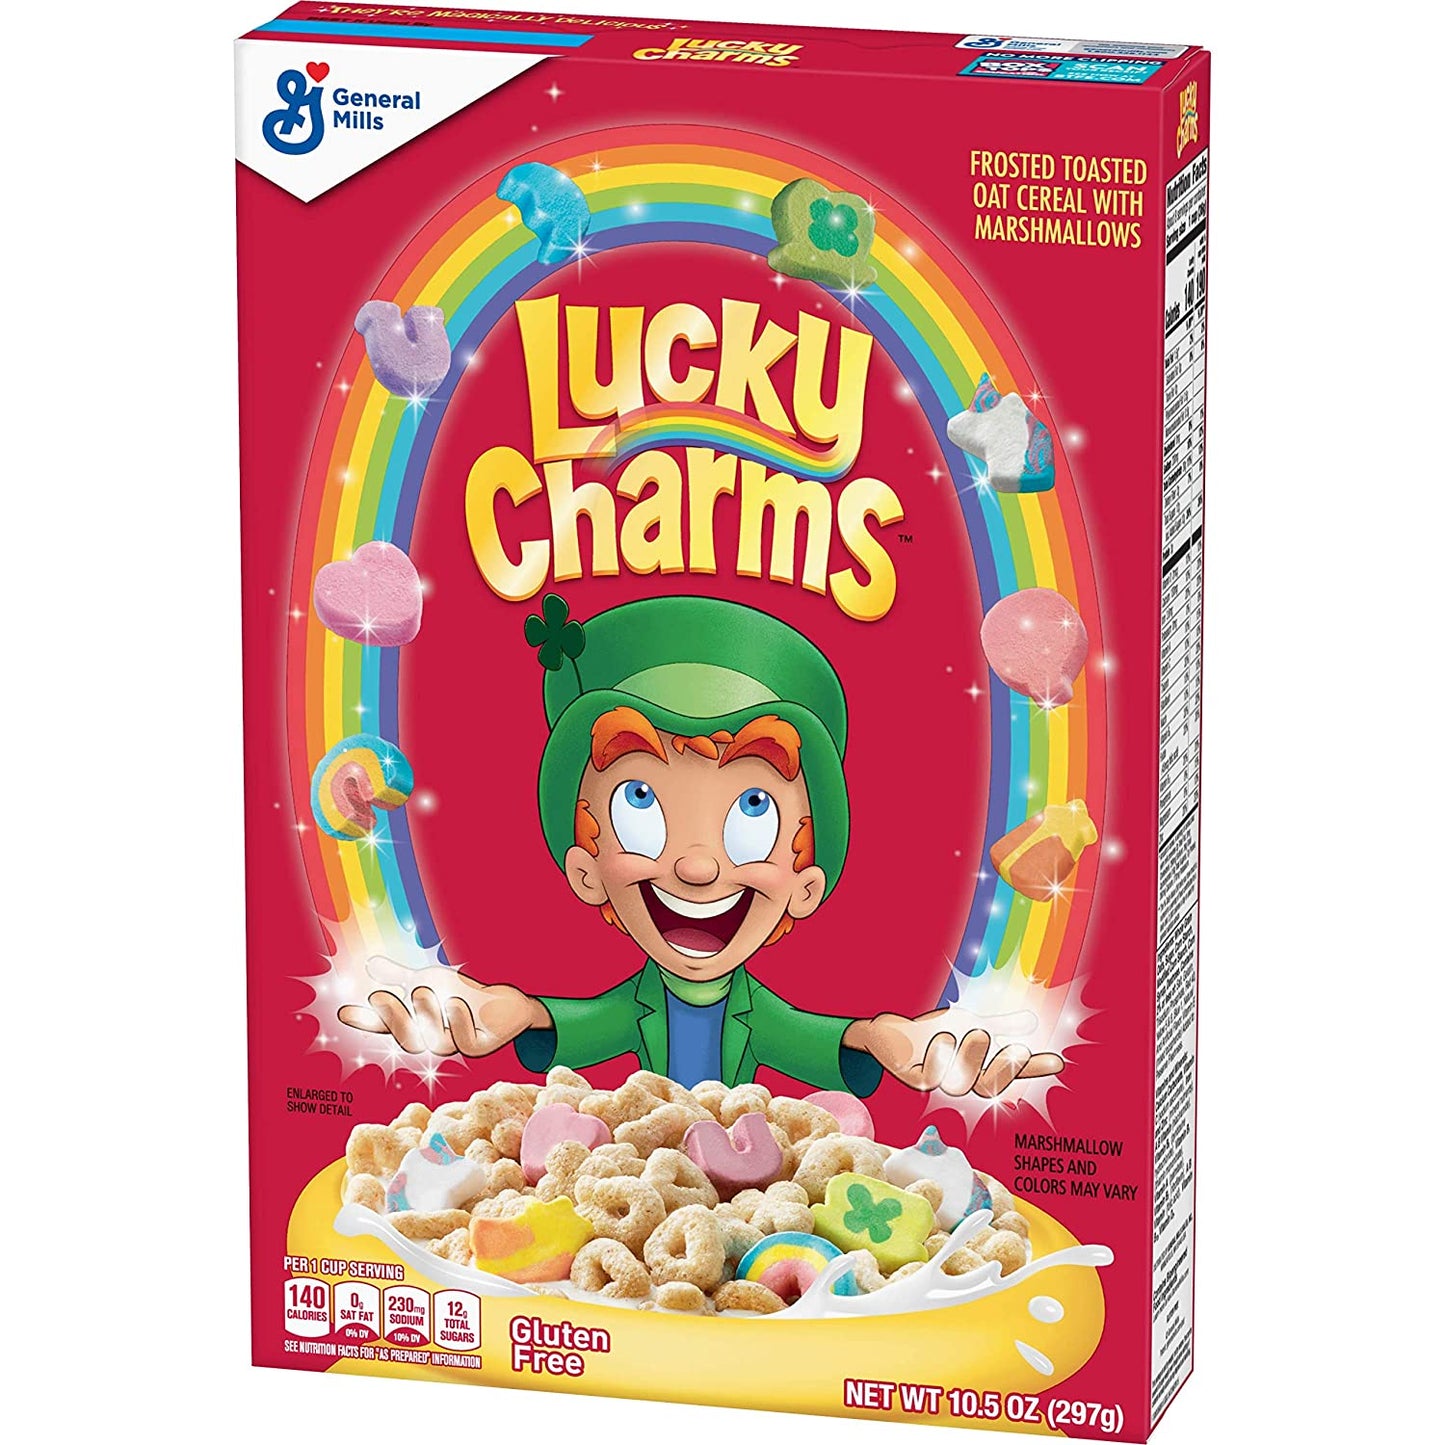 General Mills Cereal Lucky Charms 297g - reddotgreendot